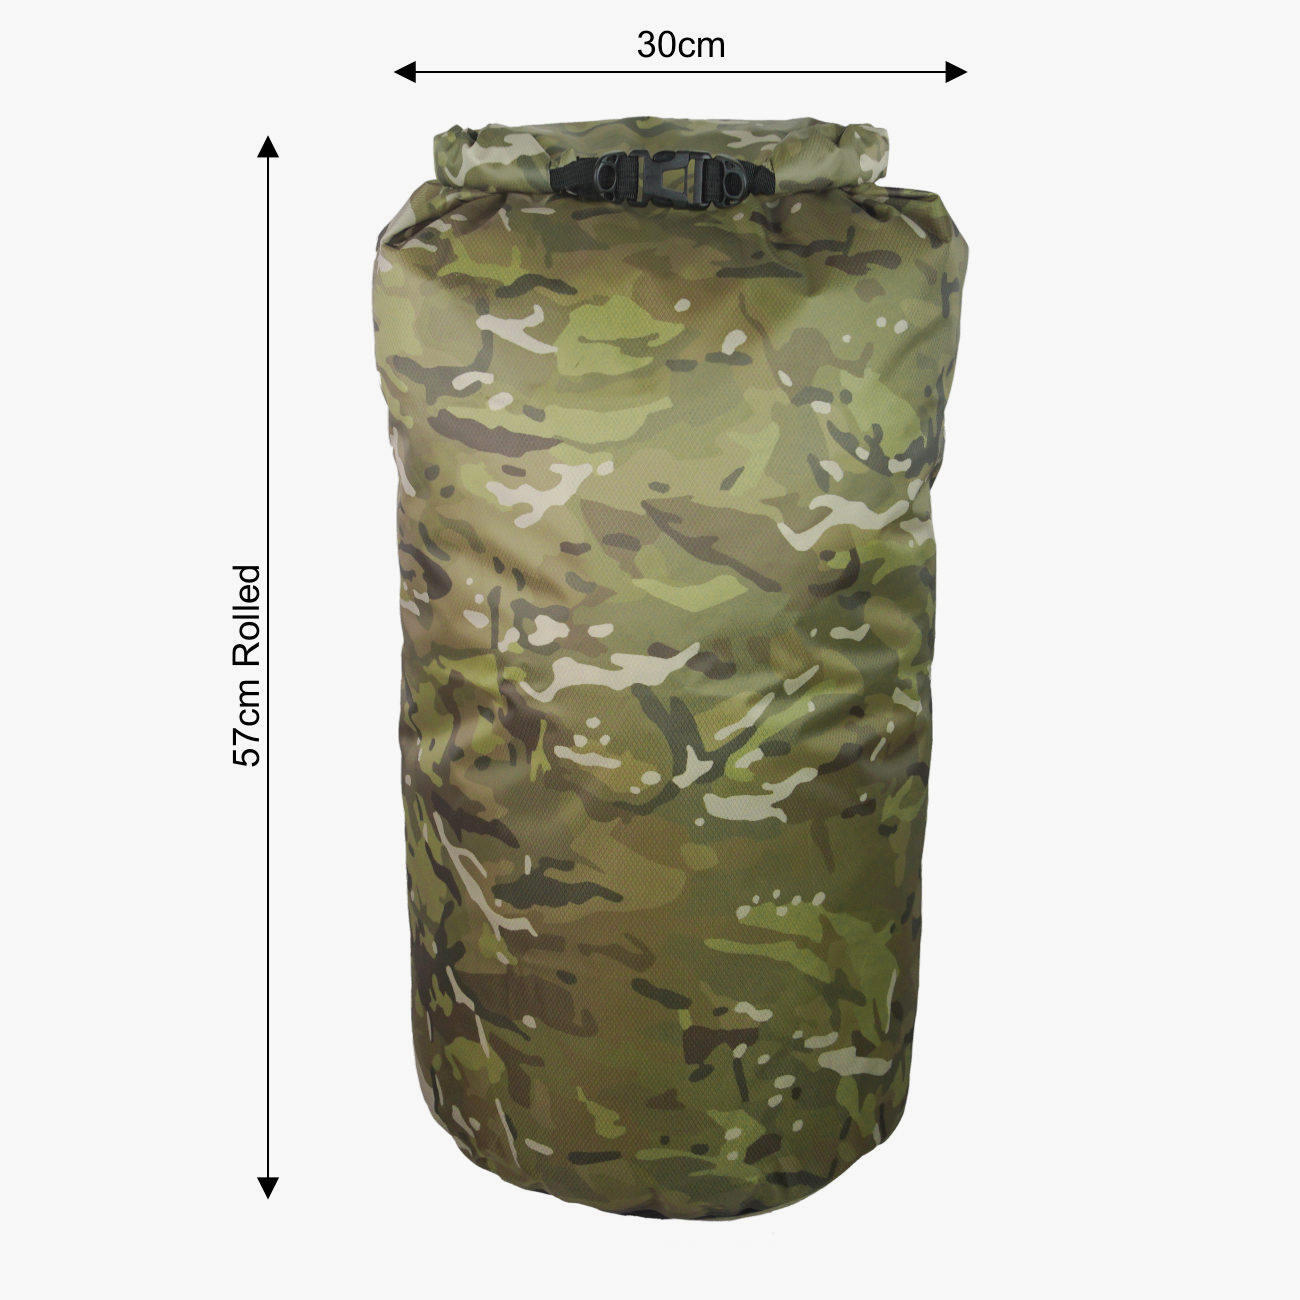 Lomo 40L Camouflage Dry Bag - Roll Down 4/4